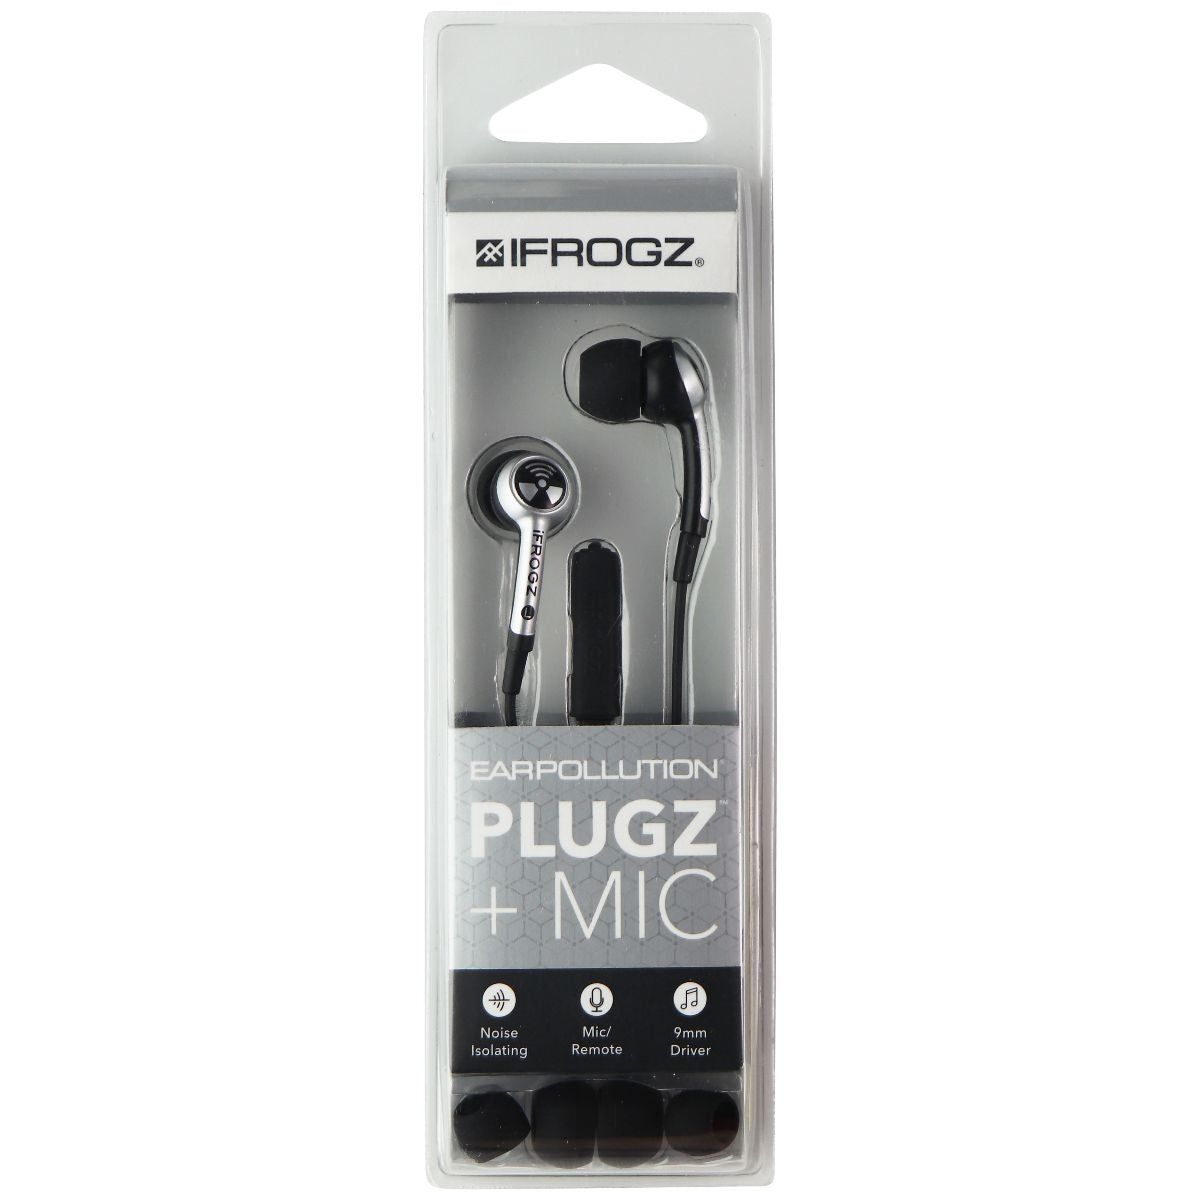 iFrogz Ear Pollution Plugz + Mic Earbuds - Black/Silver Portable Audio - Headphones iFrogz    - Simple Cell Bulk Wholesale Pricing - USA Seller